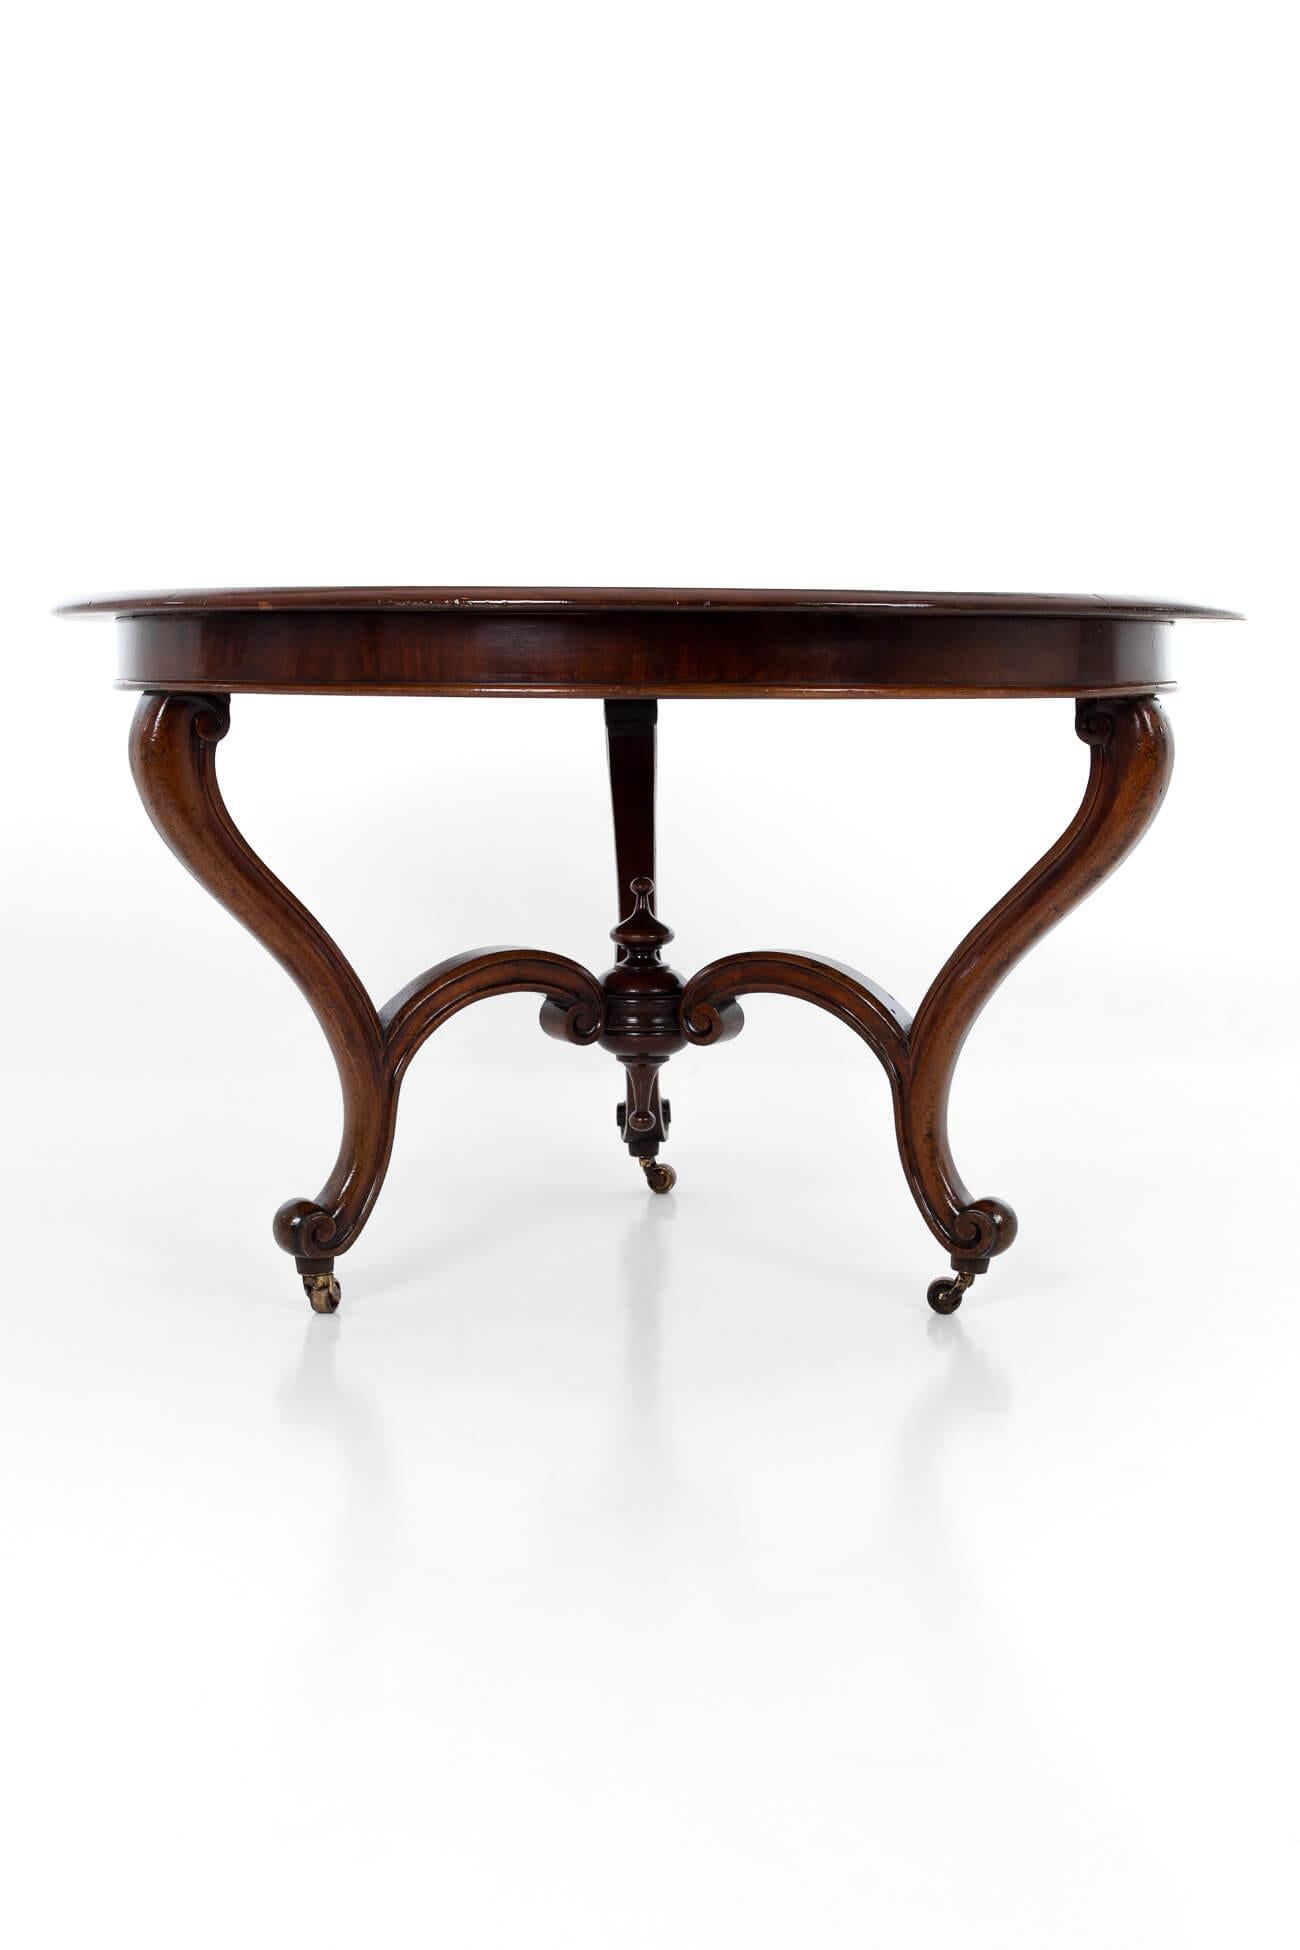 Fabulous mid-19th century fruitwood centre table in exceptional condition. The round top, with a rich chestnut colour, sits on three scrolling cabriole legs joined together by conforming stretchers. Elegant proportions, striking central upturned